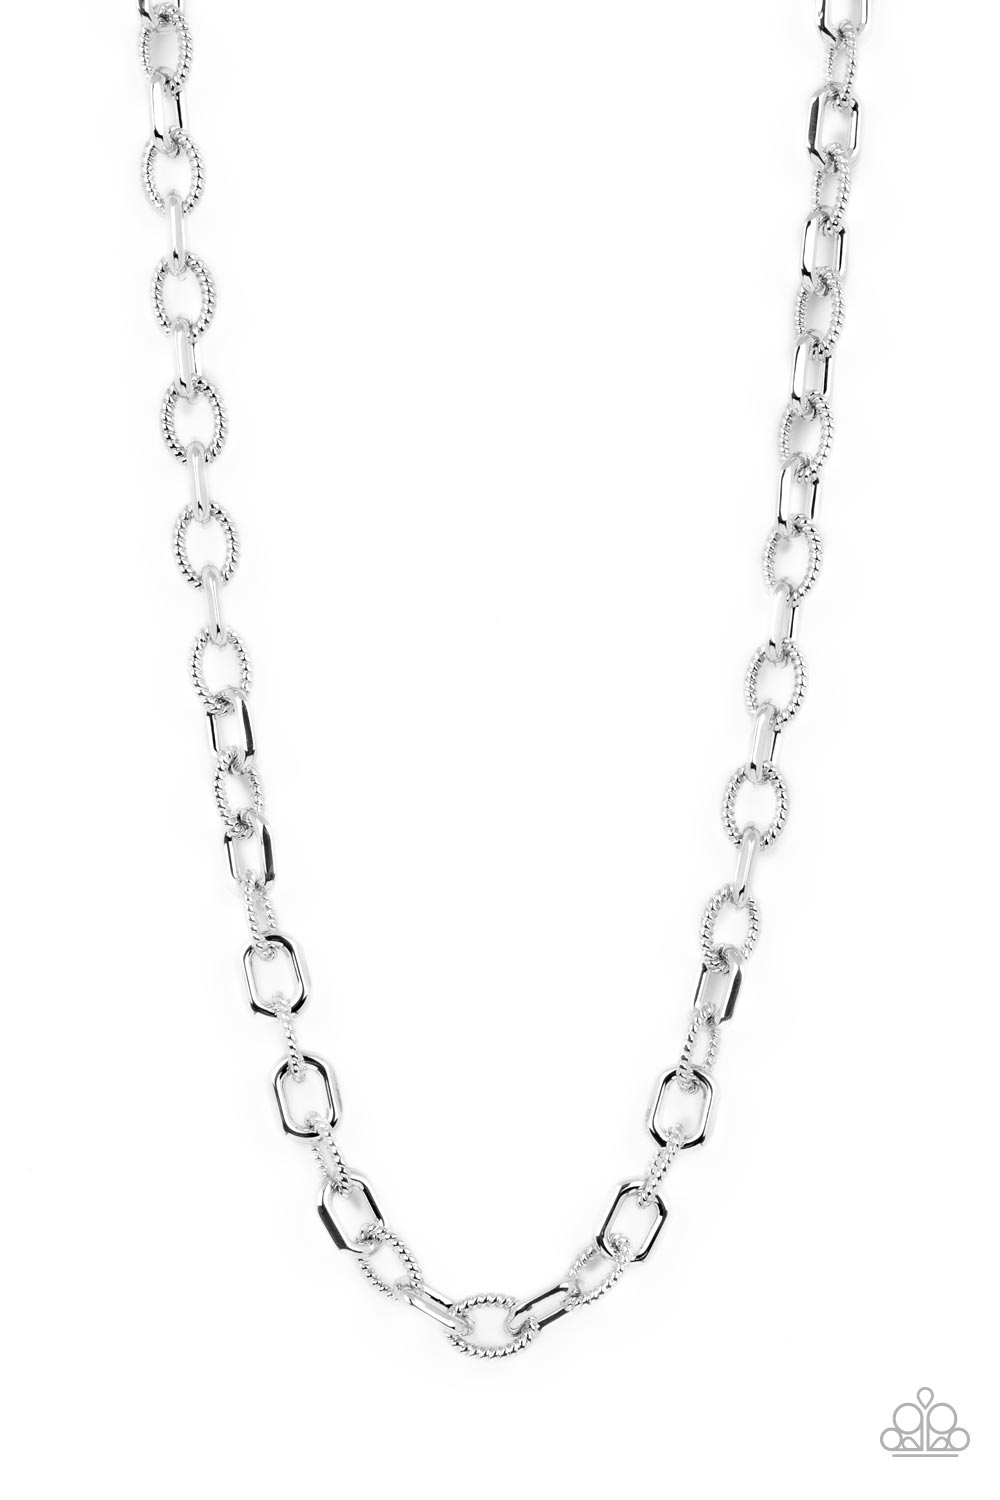 Modern Motorhead - Silver Chain Sugar Necklace Bling Jewelry Paparazzi – Accessories and - Urban Bee